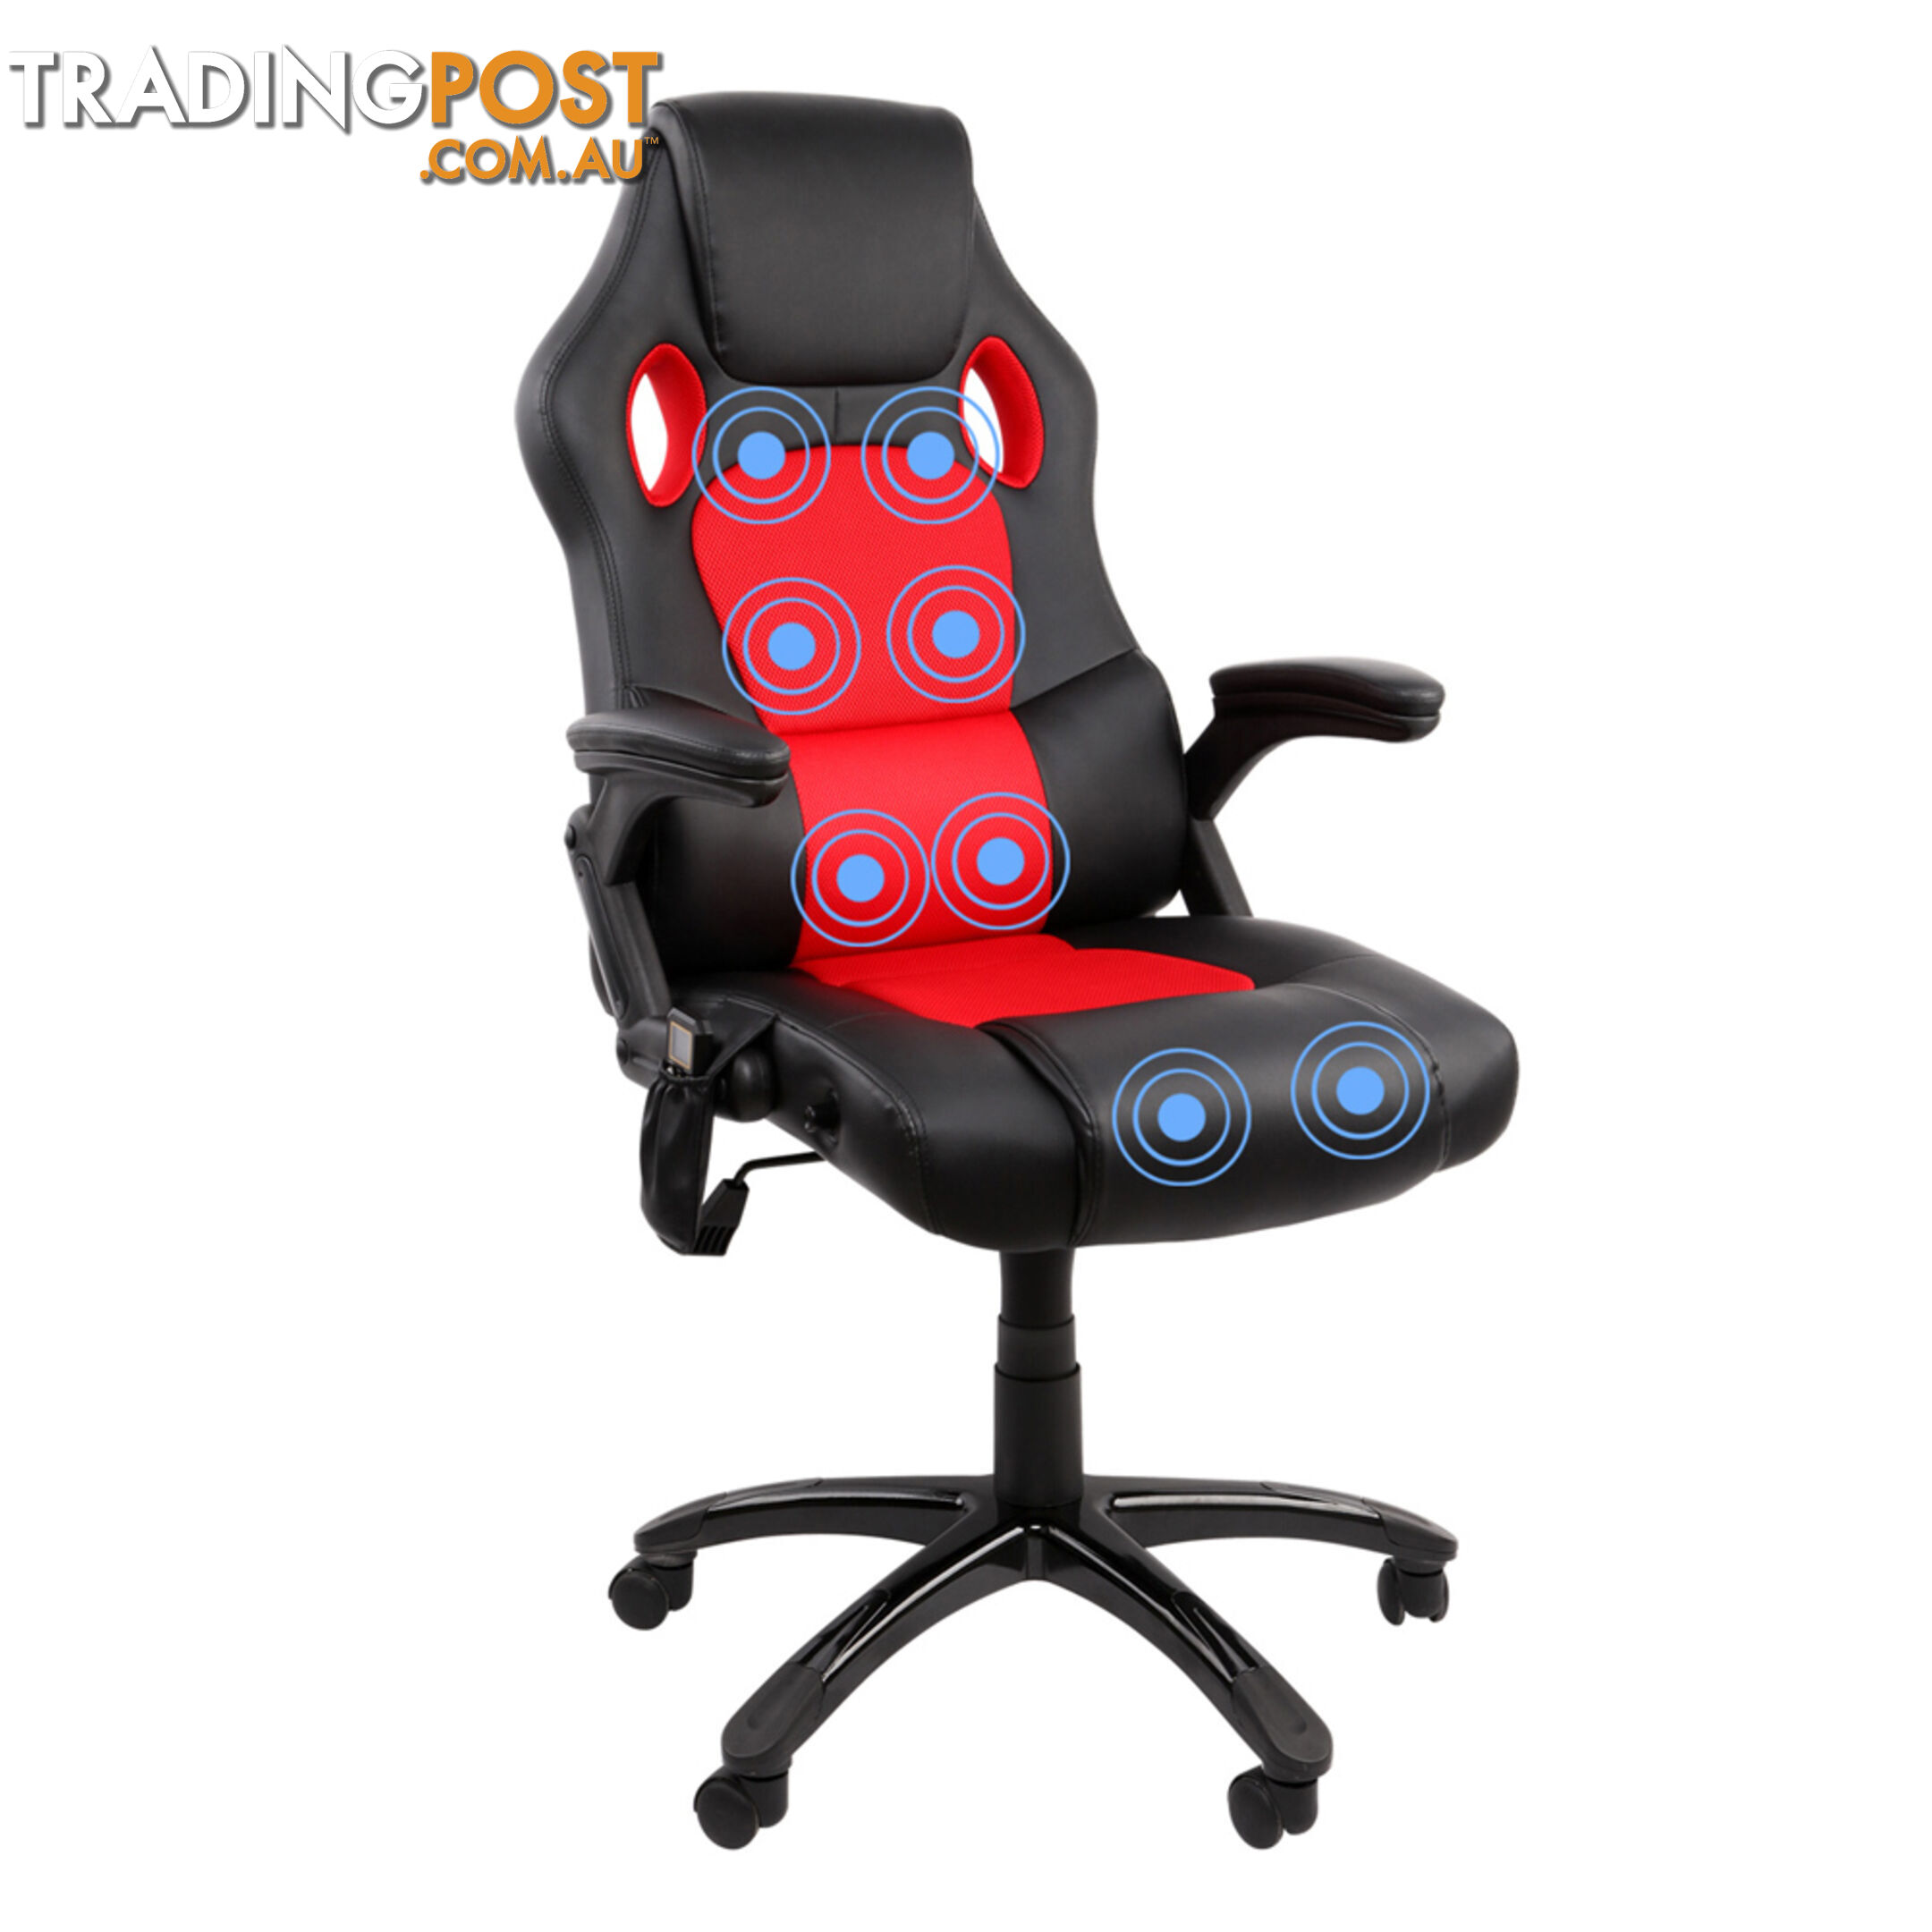 PU Leather Office Ergonomic Computer Chair 8 Point Massage Recliner Heated